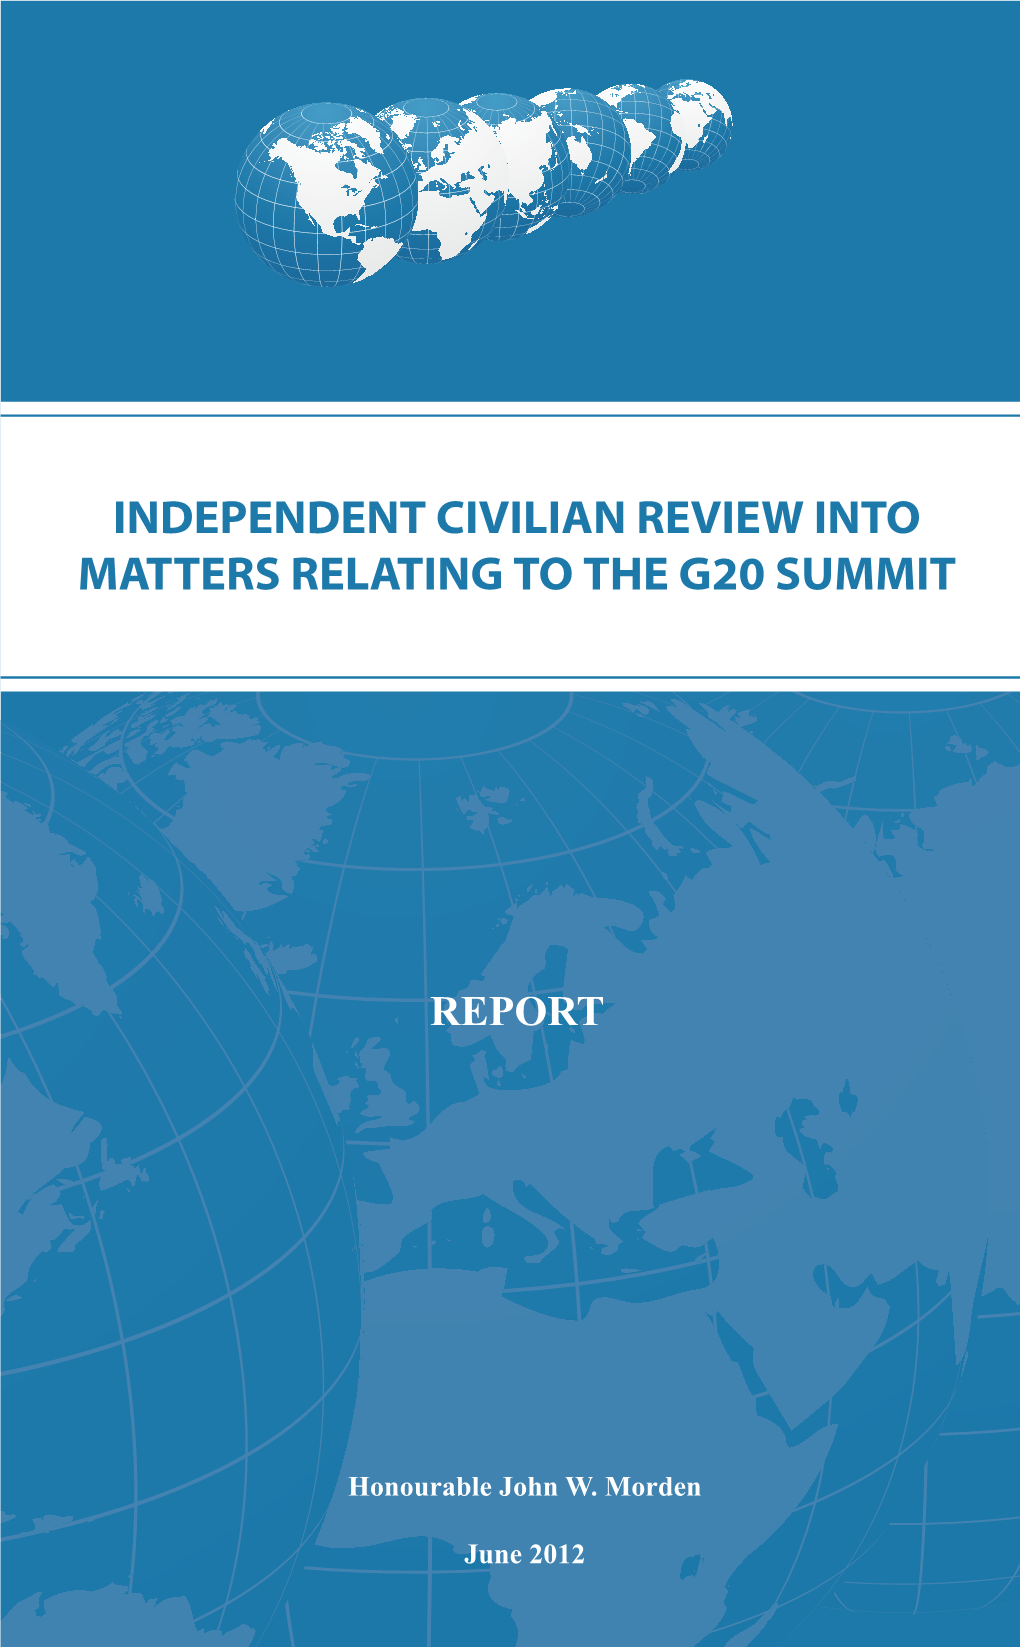 Independent Civilian Review Into Matters Relating to the G20 Summit